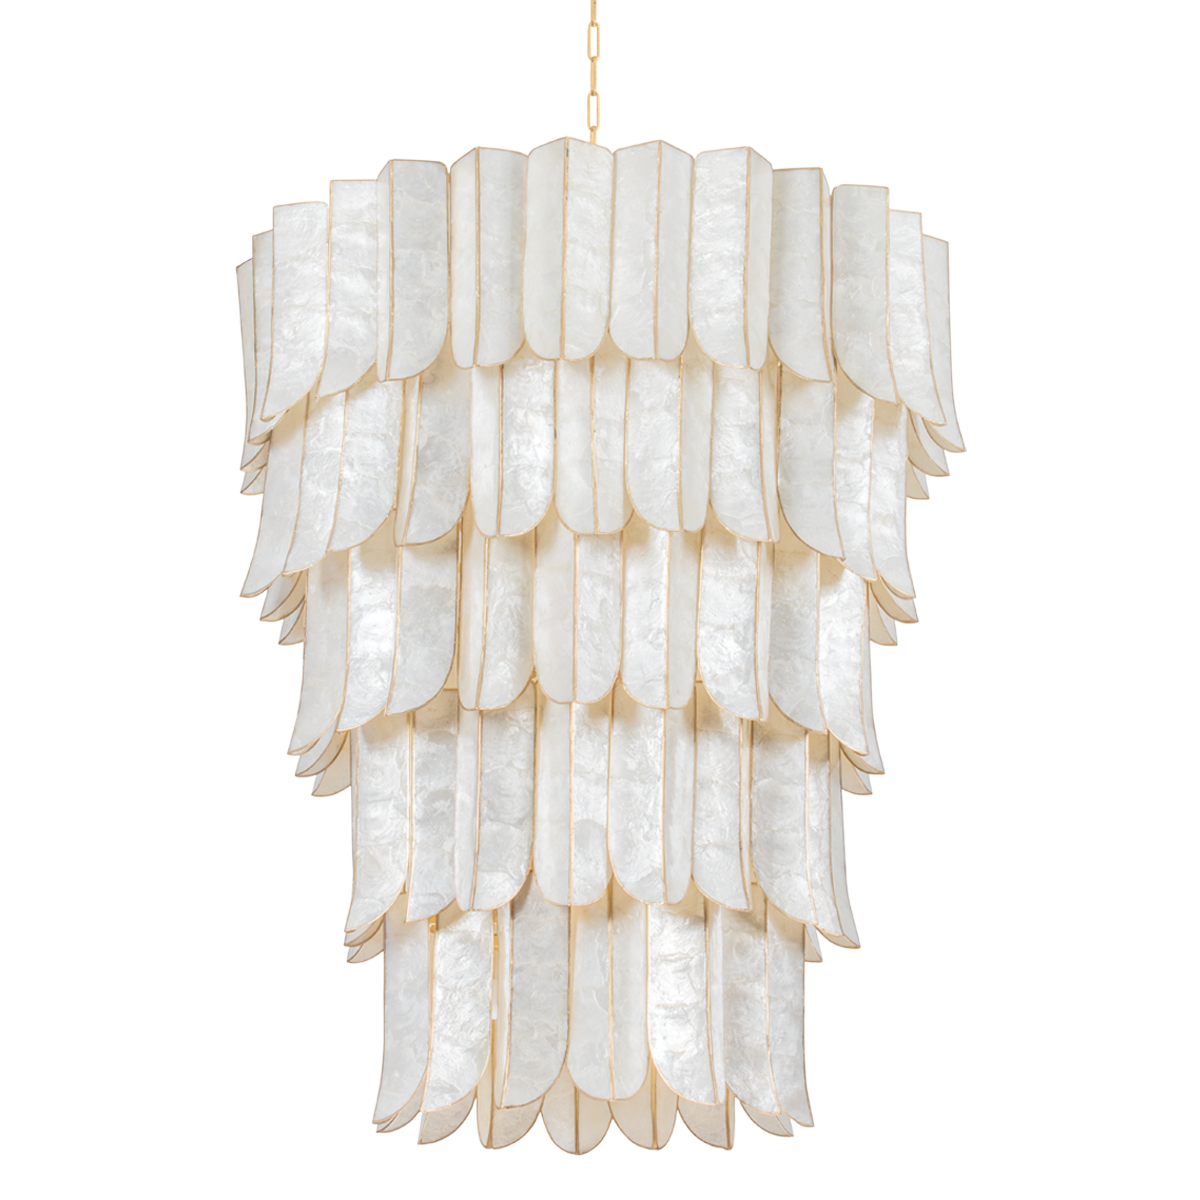 CARTAGENA CHANDALIER - LARGE, The Alley Exchange Lighting Collection